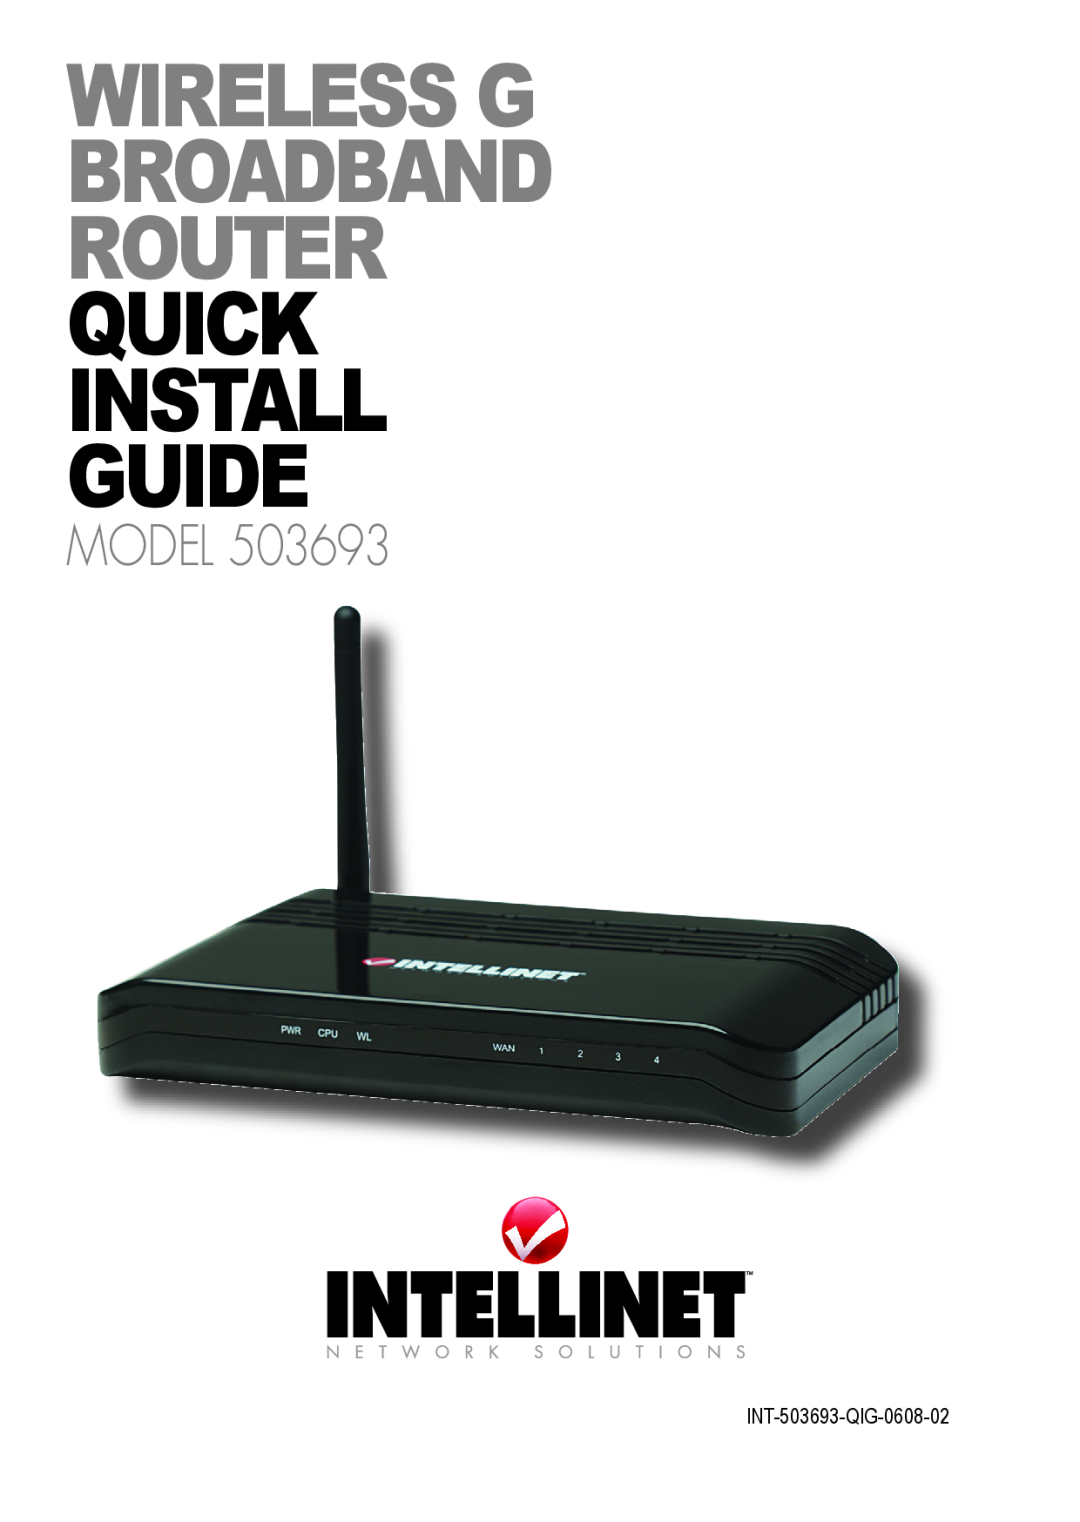 Intellinet Network Solutions manual Wireless G Broadband Router quick install guide, Model, INT-503693-QIG-0608-02 